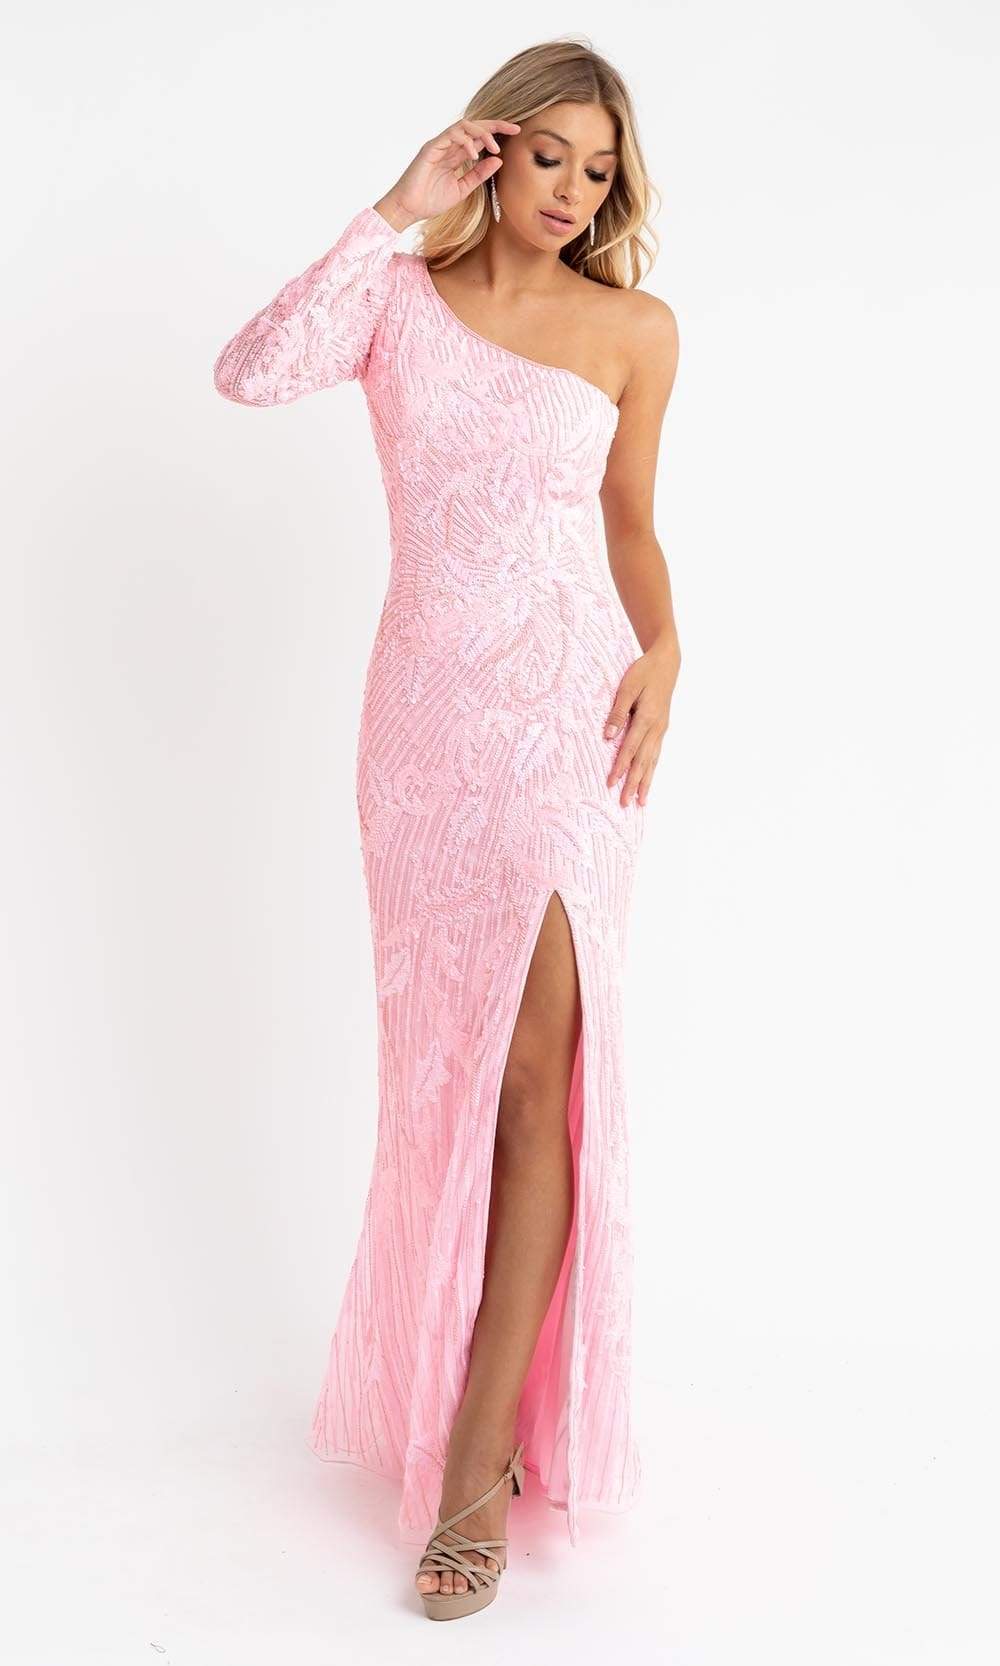 Primavera Couture - 3759 Glamorous Fully Beaded One Shoulder Long